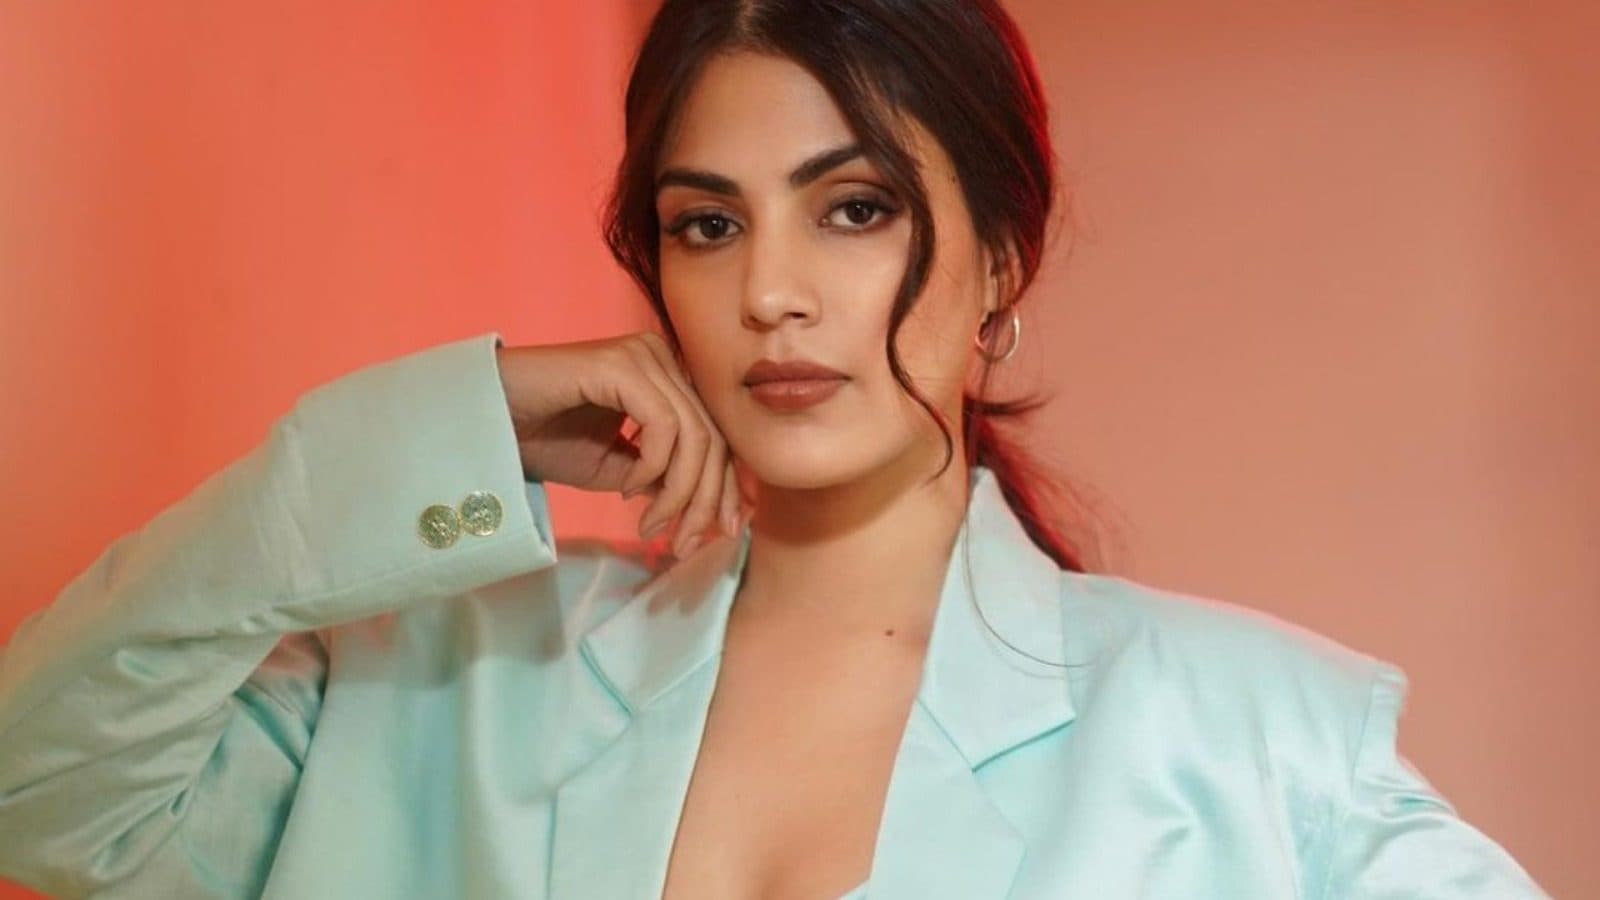 Rhea Chakraborty to Not Attend IIFA 2022, Wasn't Aware of Lookout Notice Against Her - News18